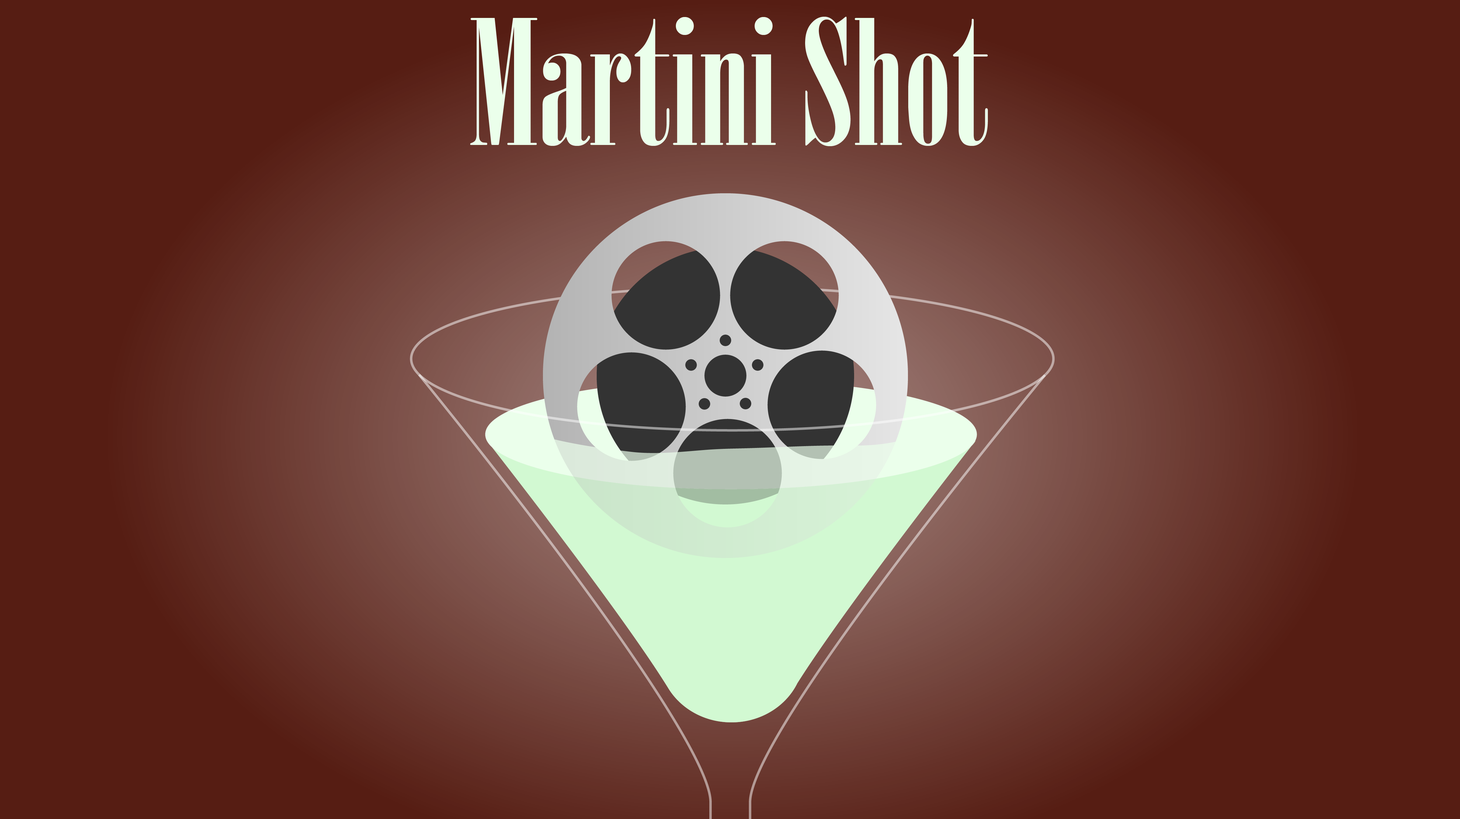 This is Rob Long and on today’s Martini Shot I talk about the time I was in Gori, Georgia and I sat in Stalin’s old reading chair and it was pretty weird, and then I twist that into an analogy about the entertainment business, as I usually do.